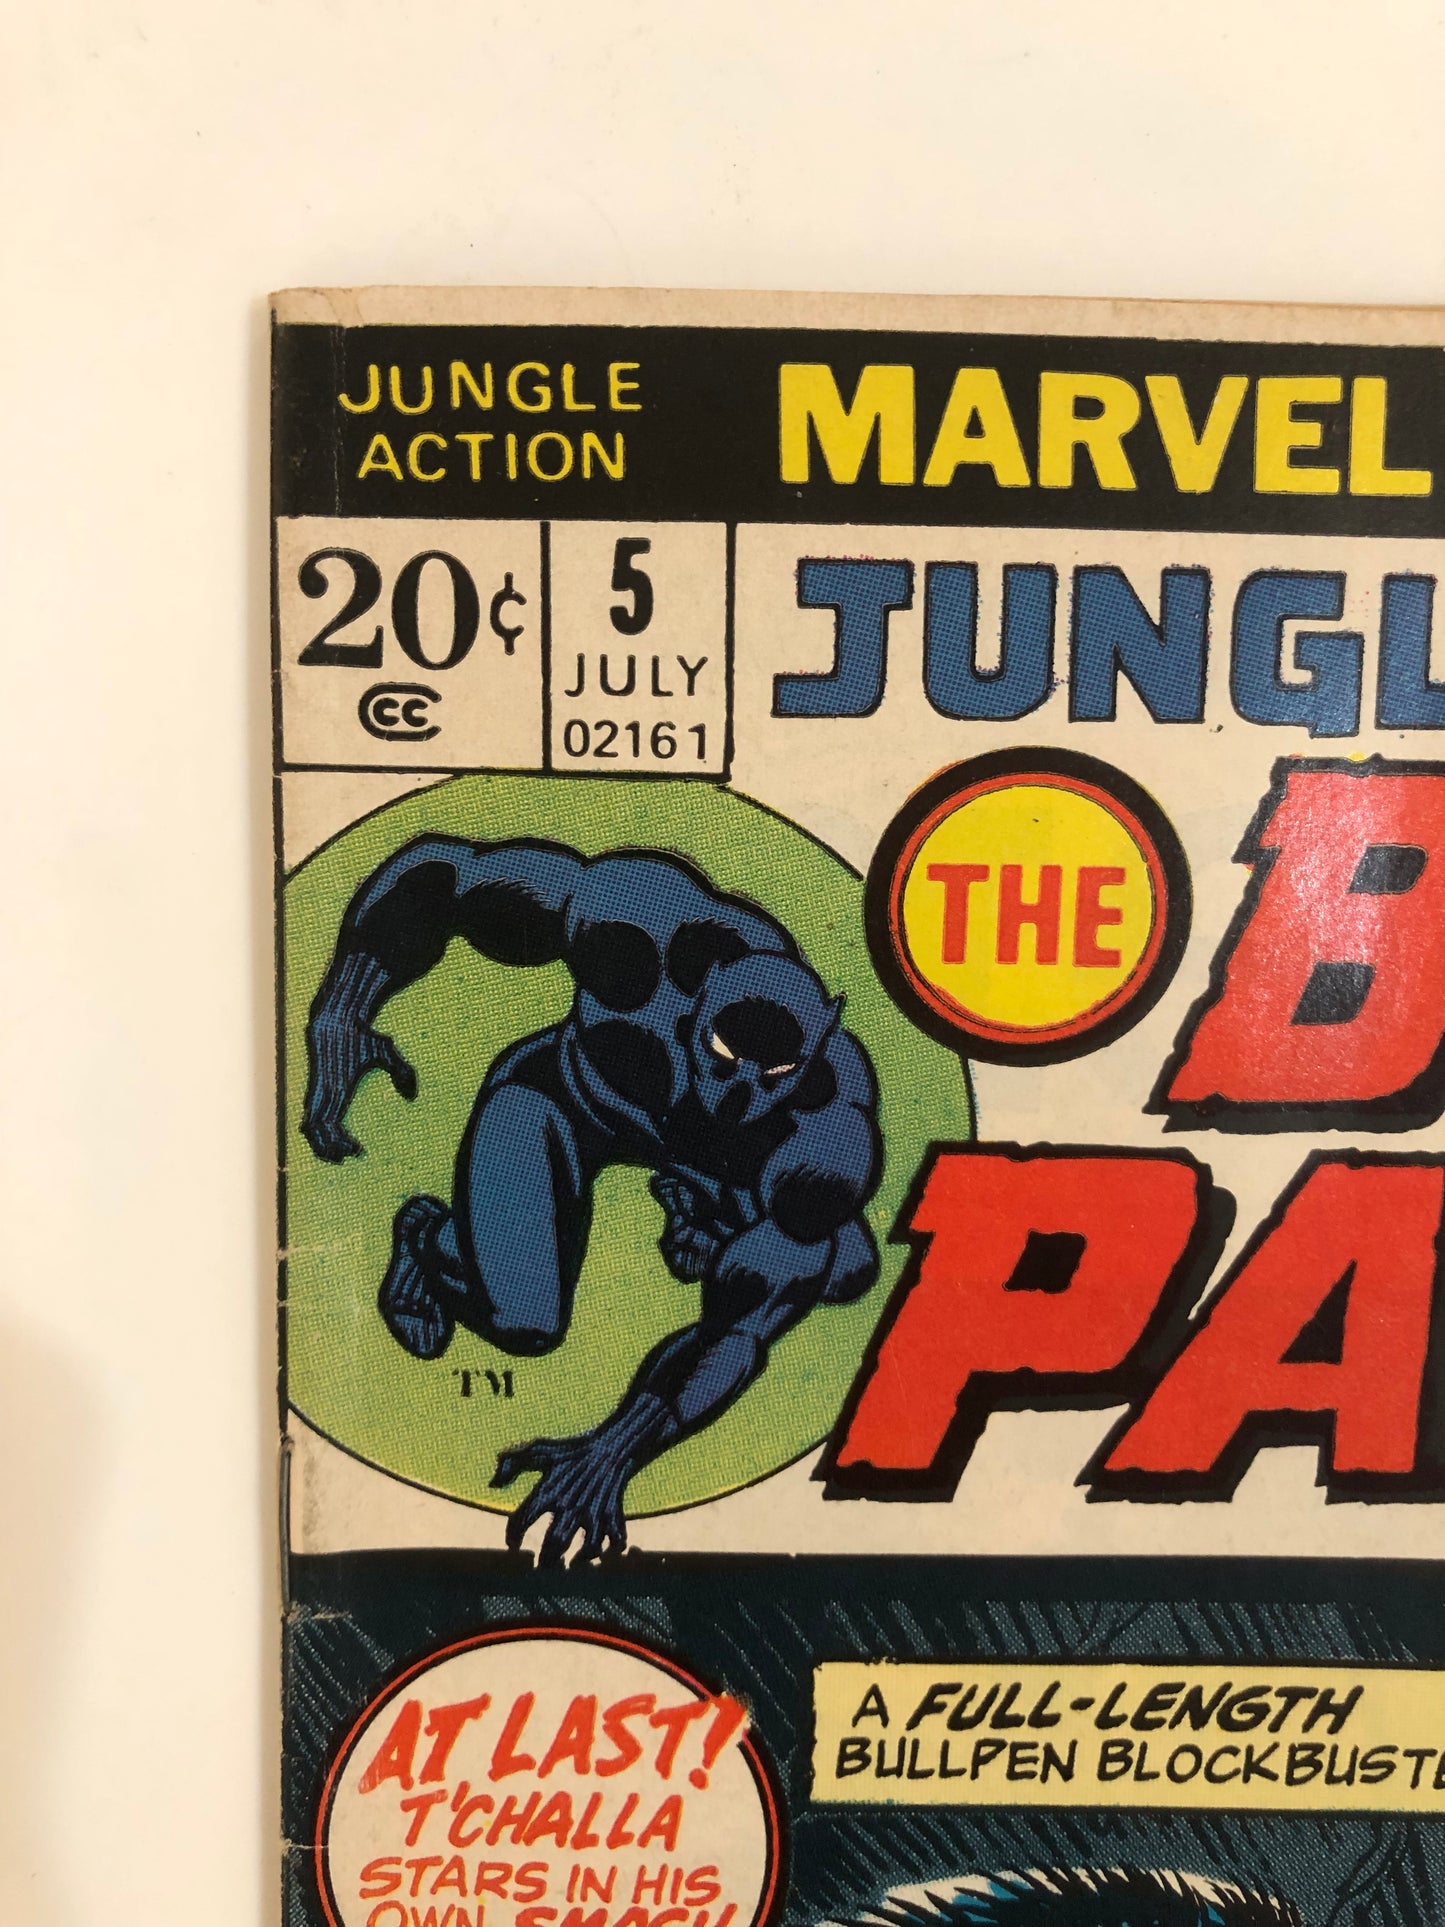 Jungle Action Ft. The Black Panther #5